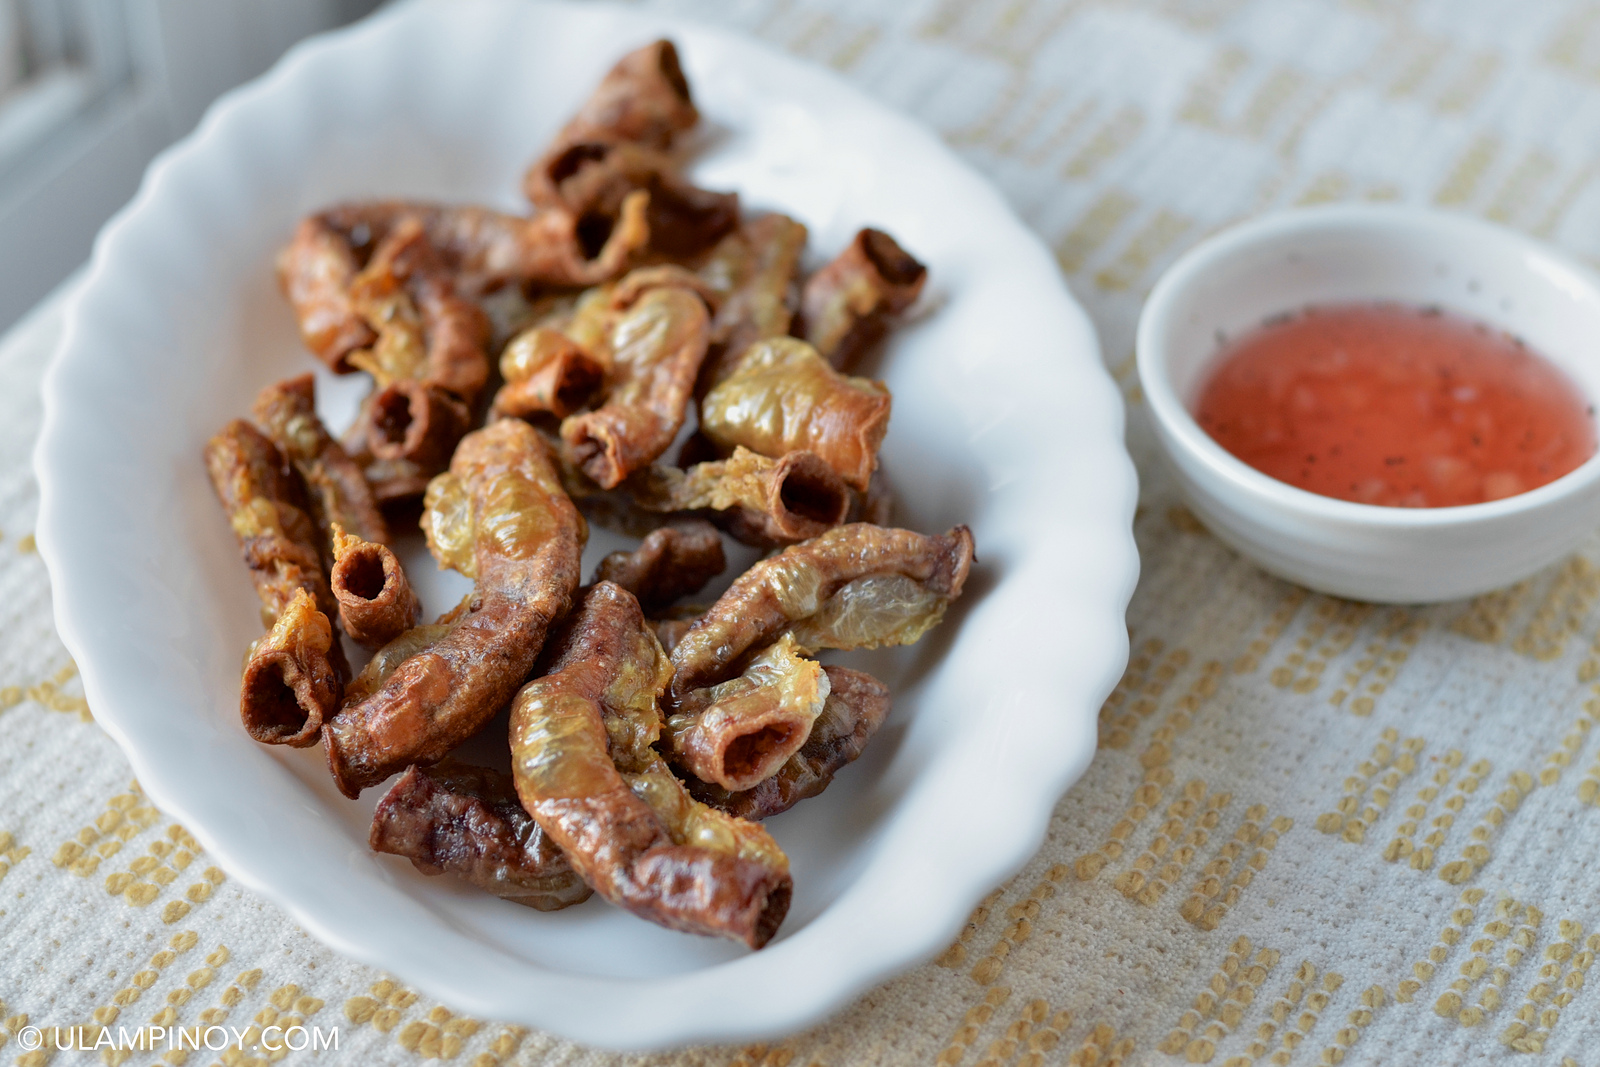 Crispy and crunchy cracklings with spiced vinegar dip